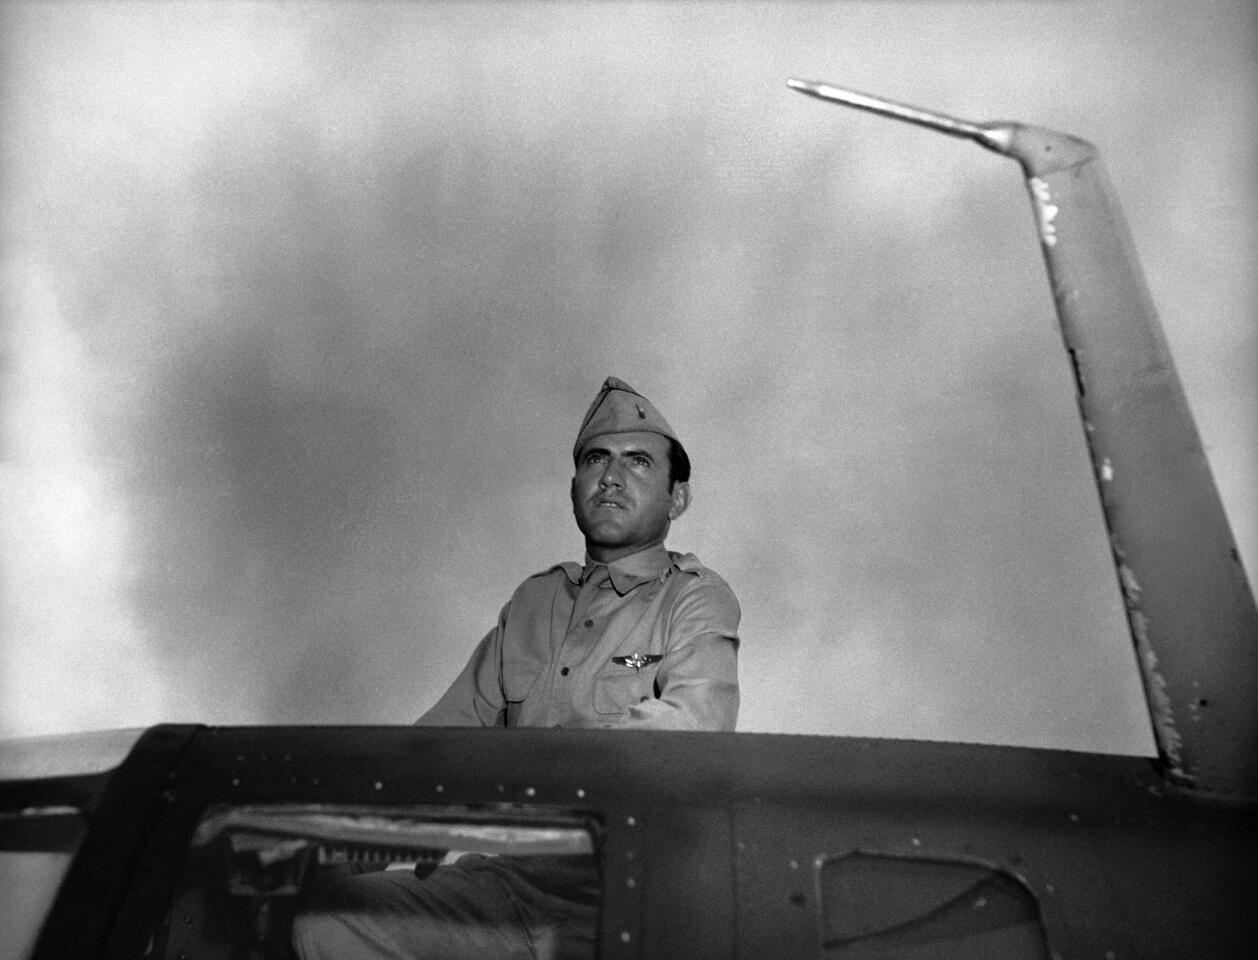 Louis Zamperini, a bombardier in the Army Air Force, peers out of the hatch nose of a bomber. Zamperini survived 47 days adrift on a raft in the Pacific Ocean before being captured by Japanese soldiers.